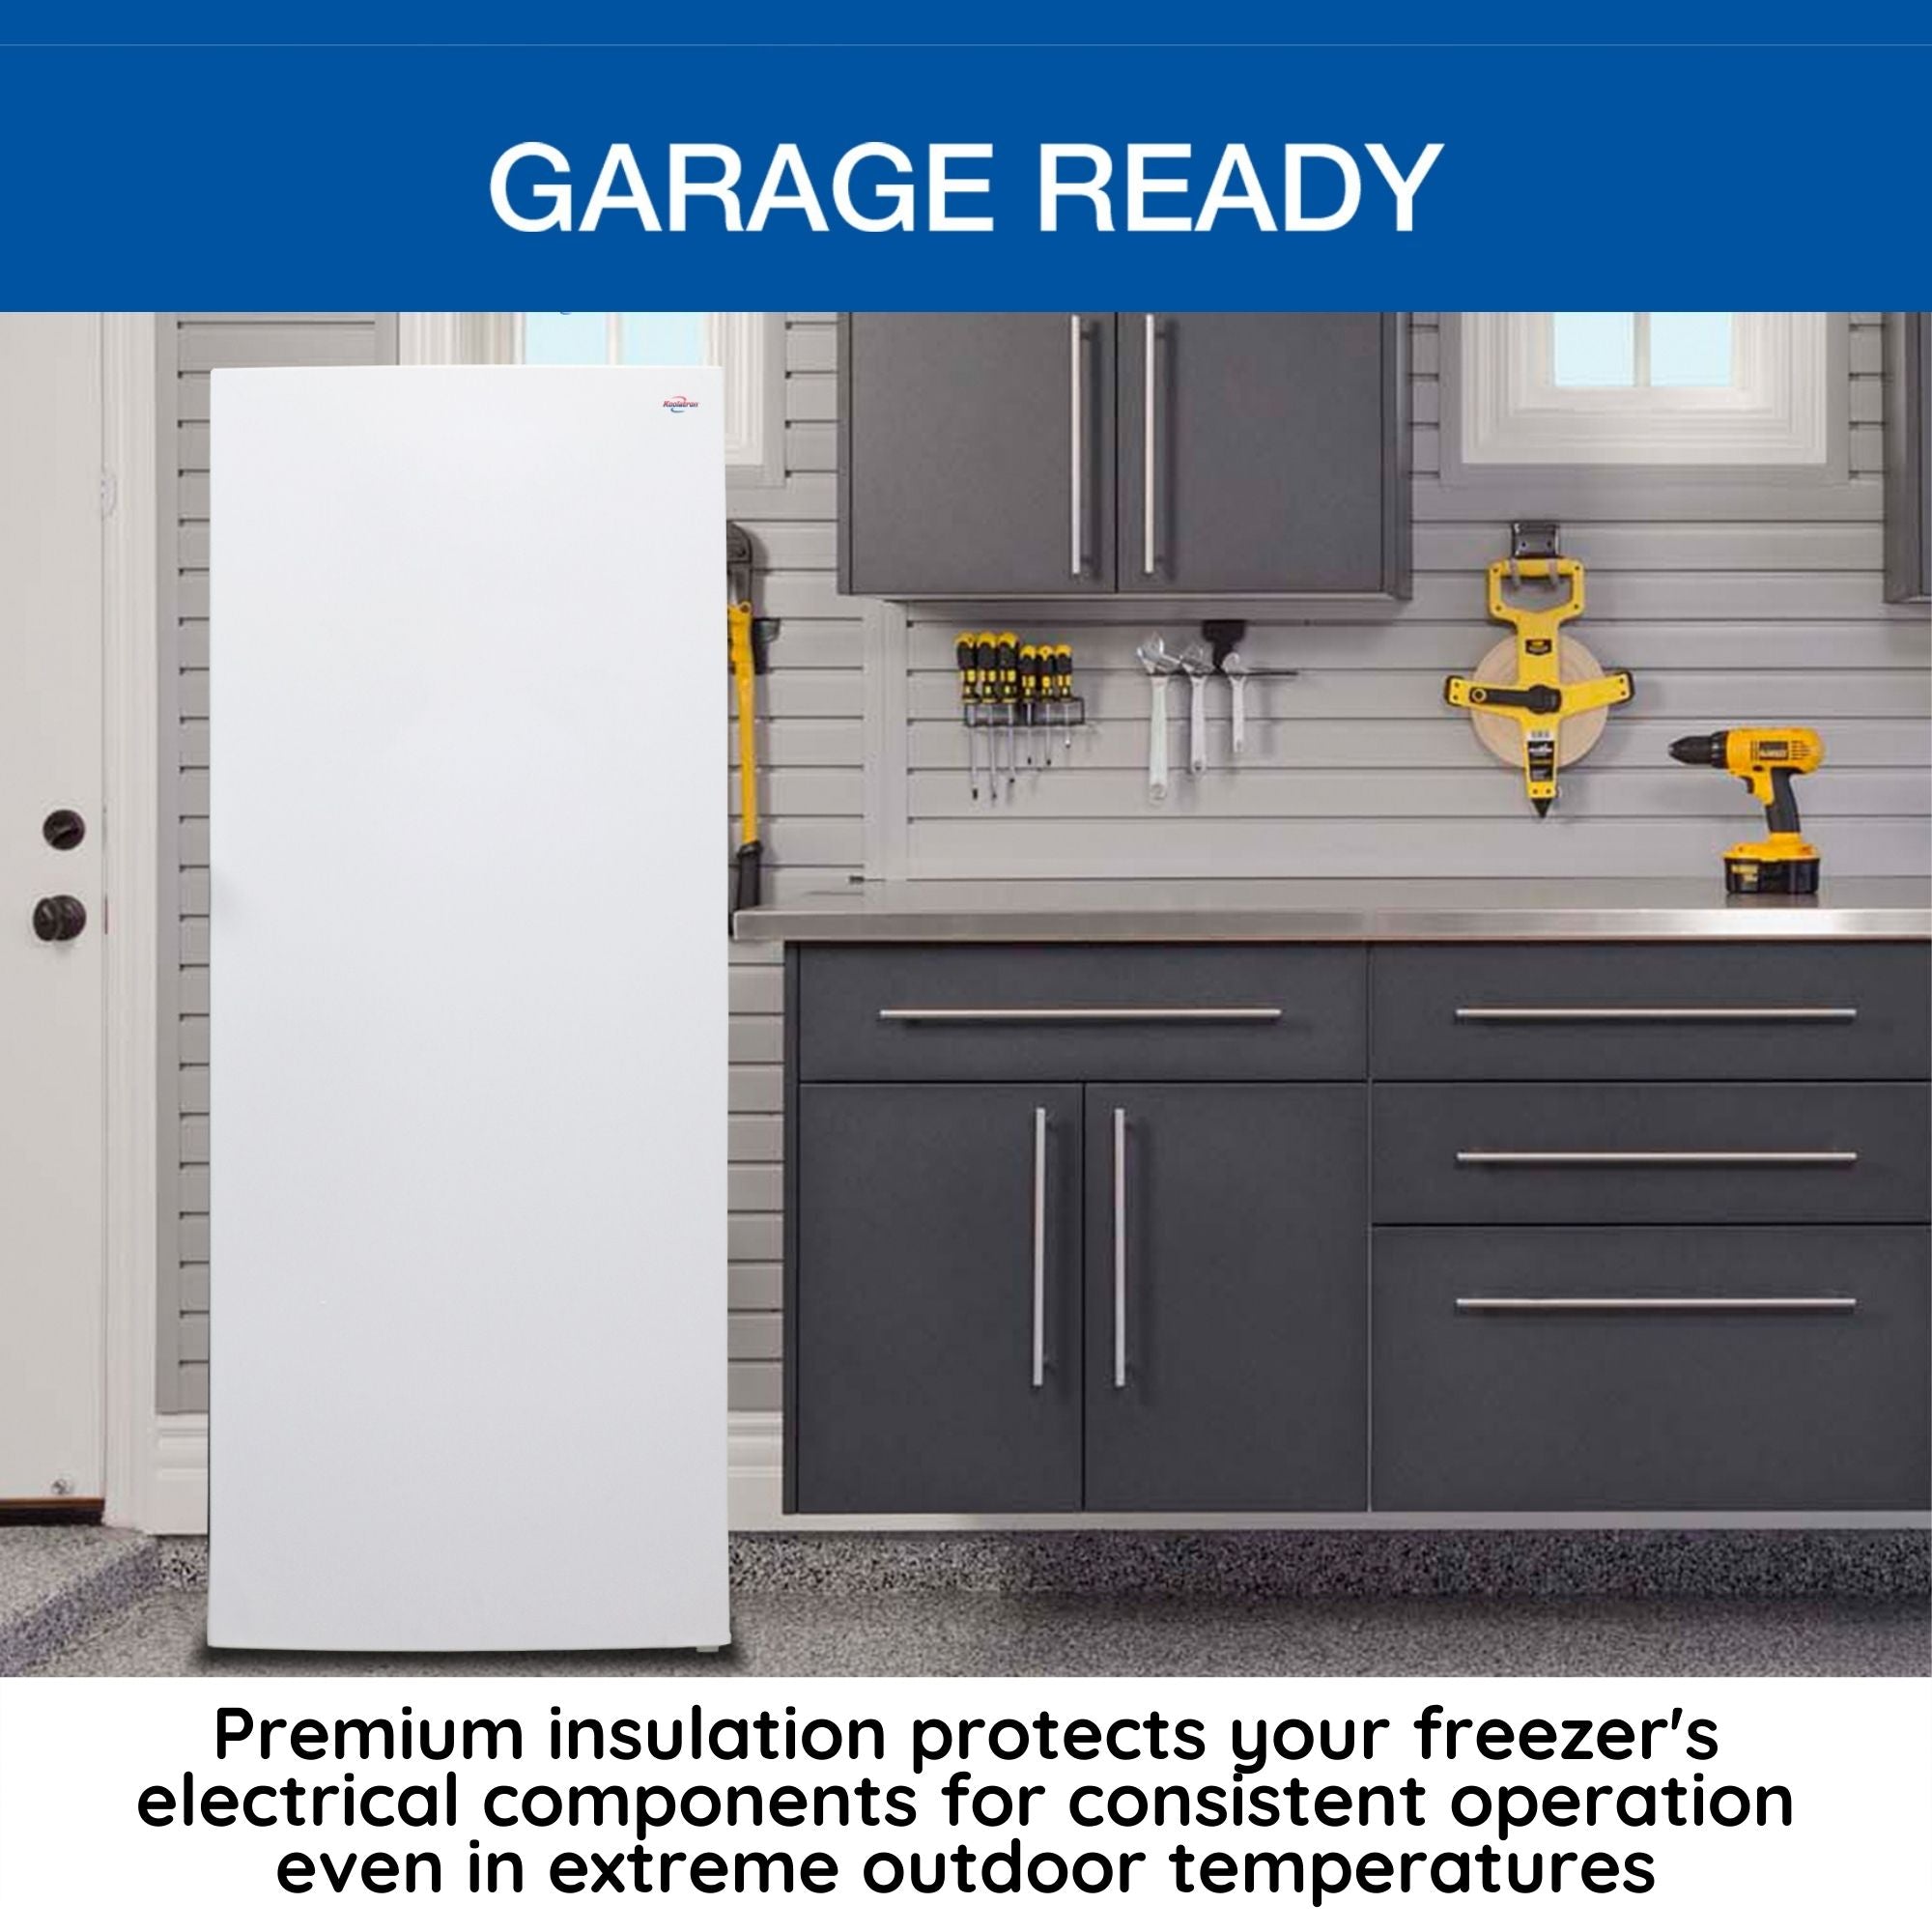 Lifestyle image of closed upright freezer on a speckled gray floor in a garage. To the right is a dark gray tool bench with upper and lower cabinets and drawers. There are black and yellow manual and power tools on the counter and hanging on the wall. Text above reads, "Garage ready," and text below reads, "Premium insulation protects your freezer’s electrical components for consistent operation even in extreme outdoor temperatures"